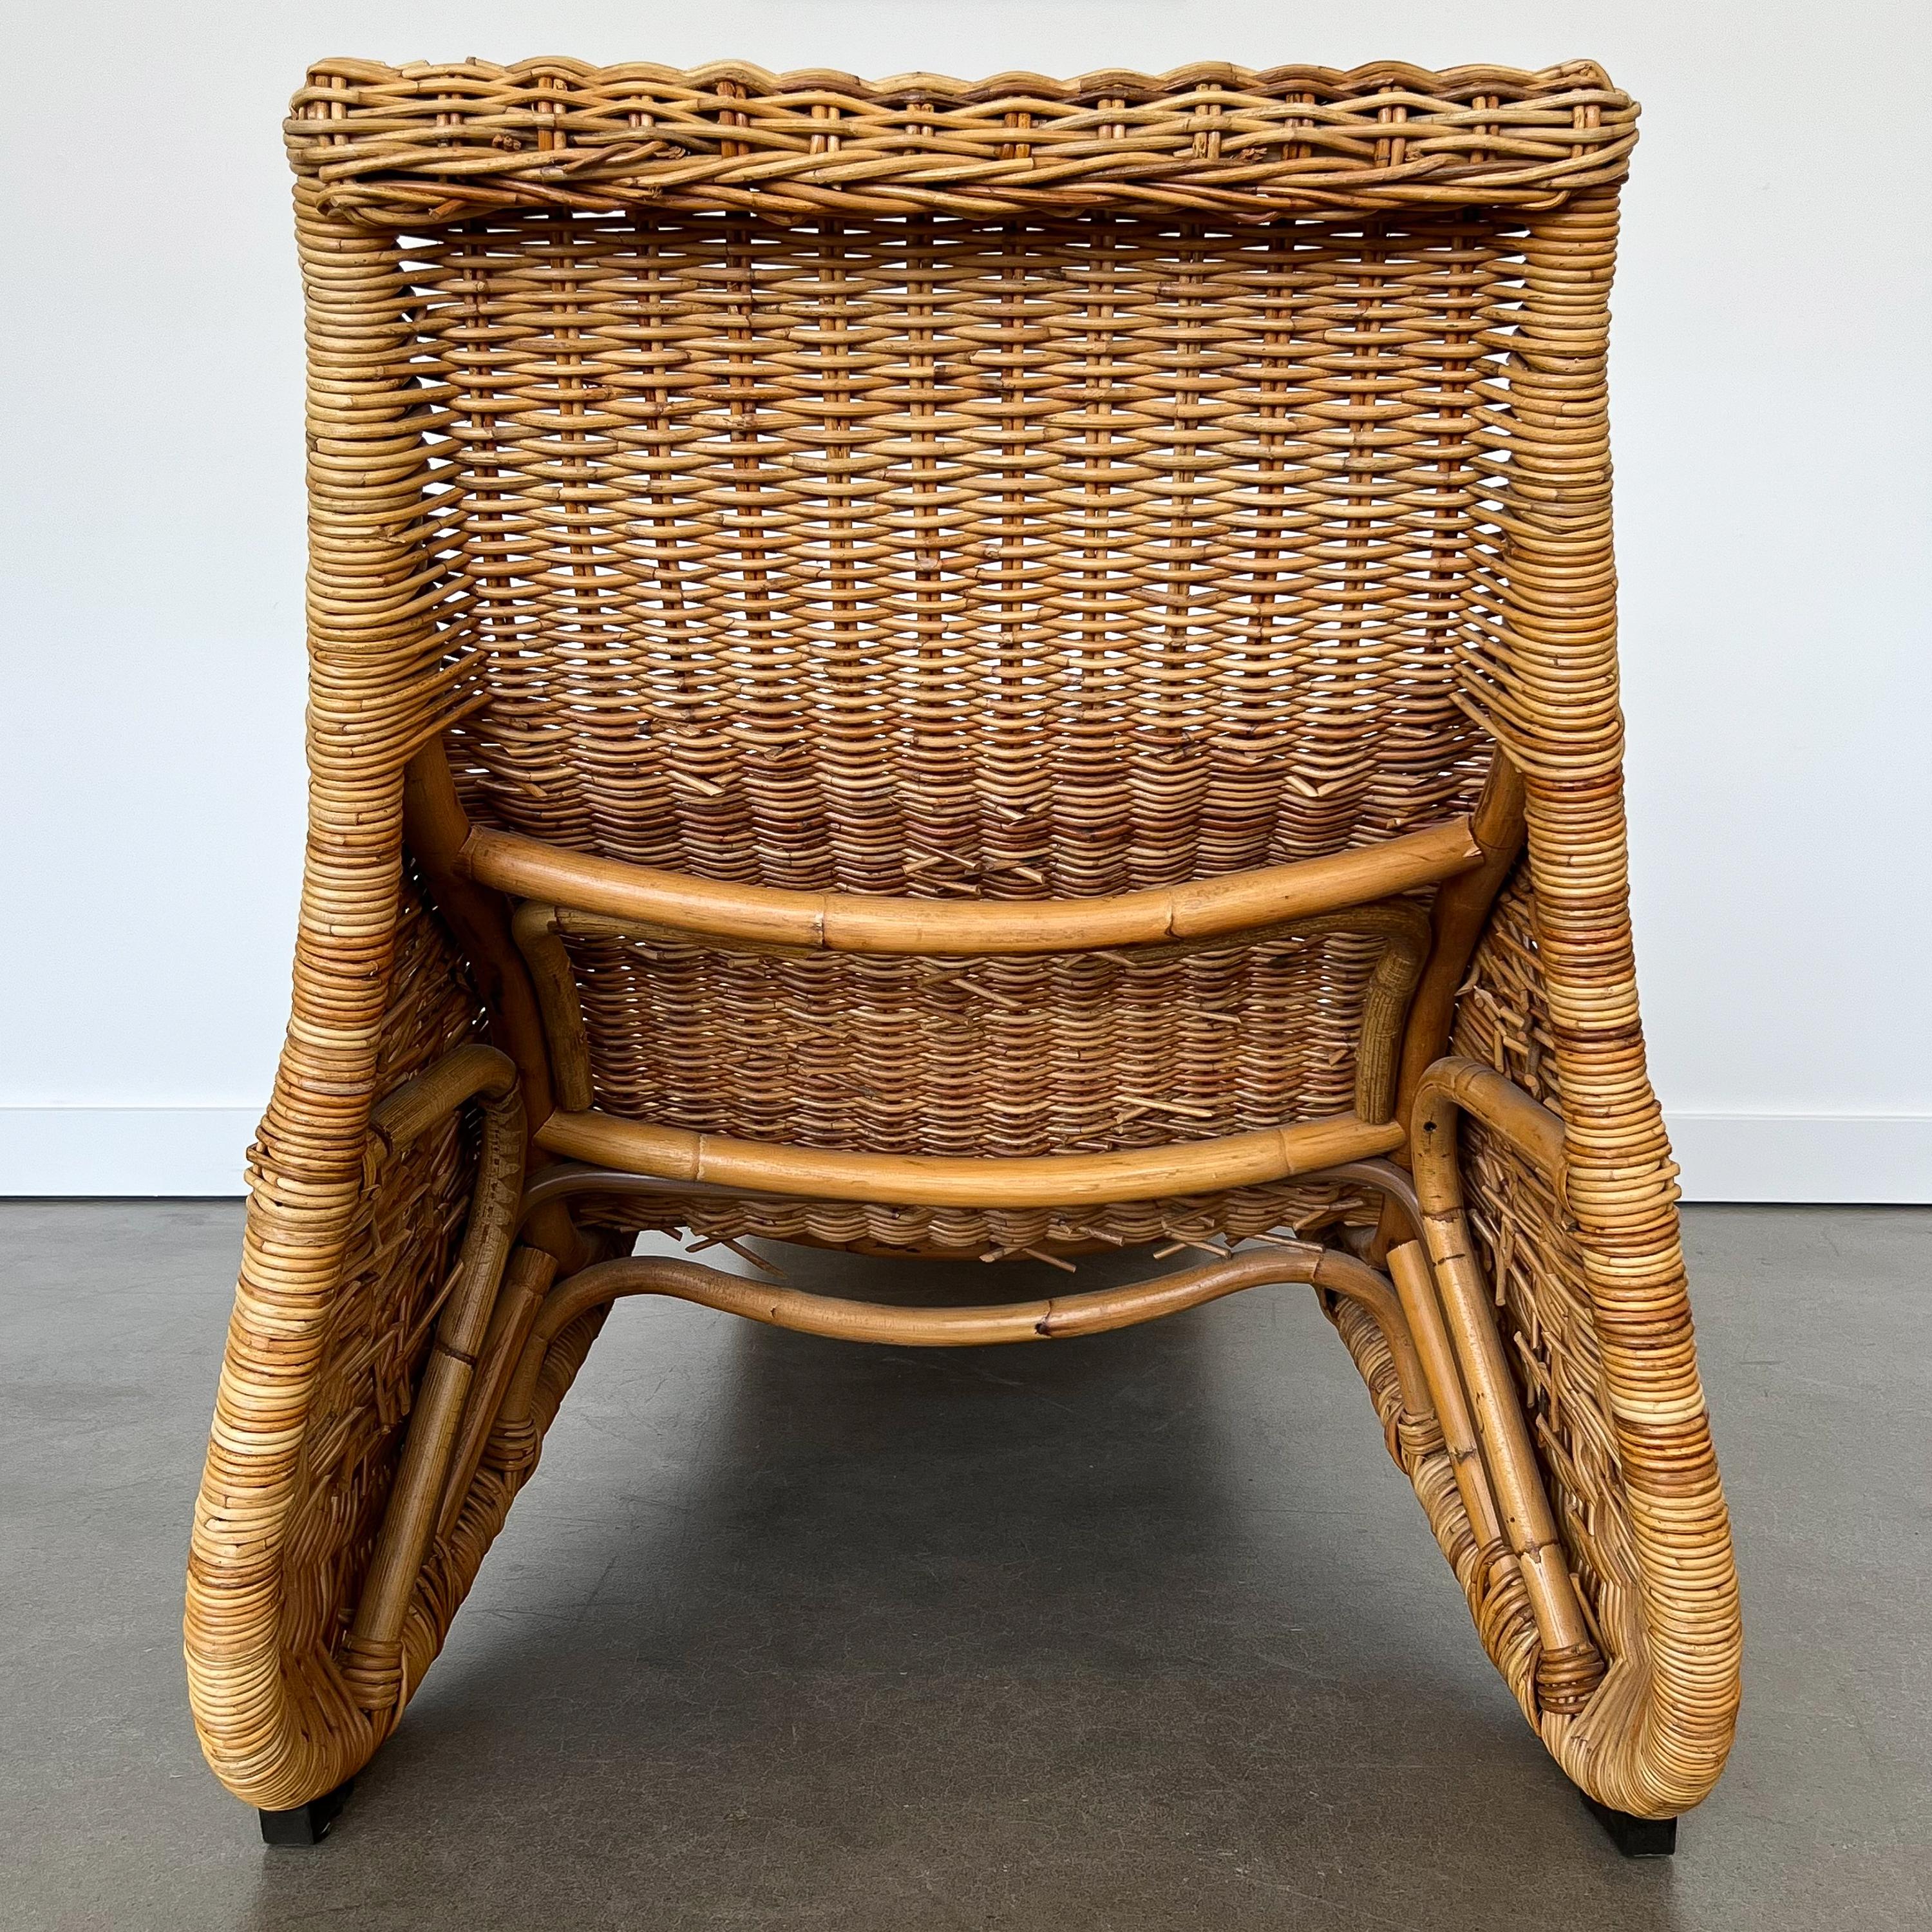 Karlskrona Rattan Wicker Chaise Lounge by Karl Malmvall for Ikea 4